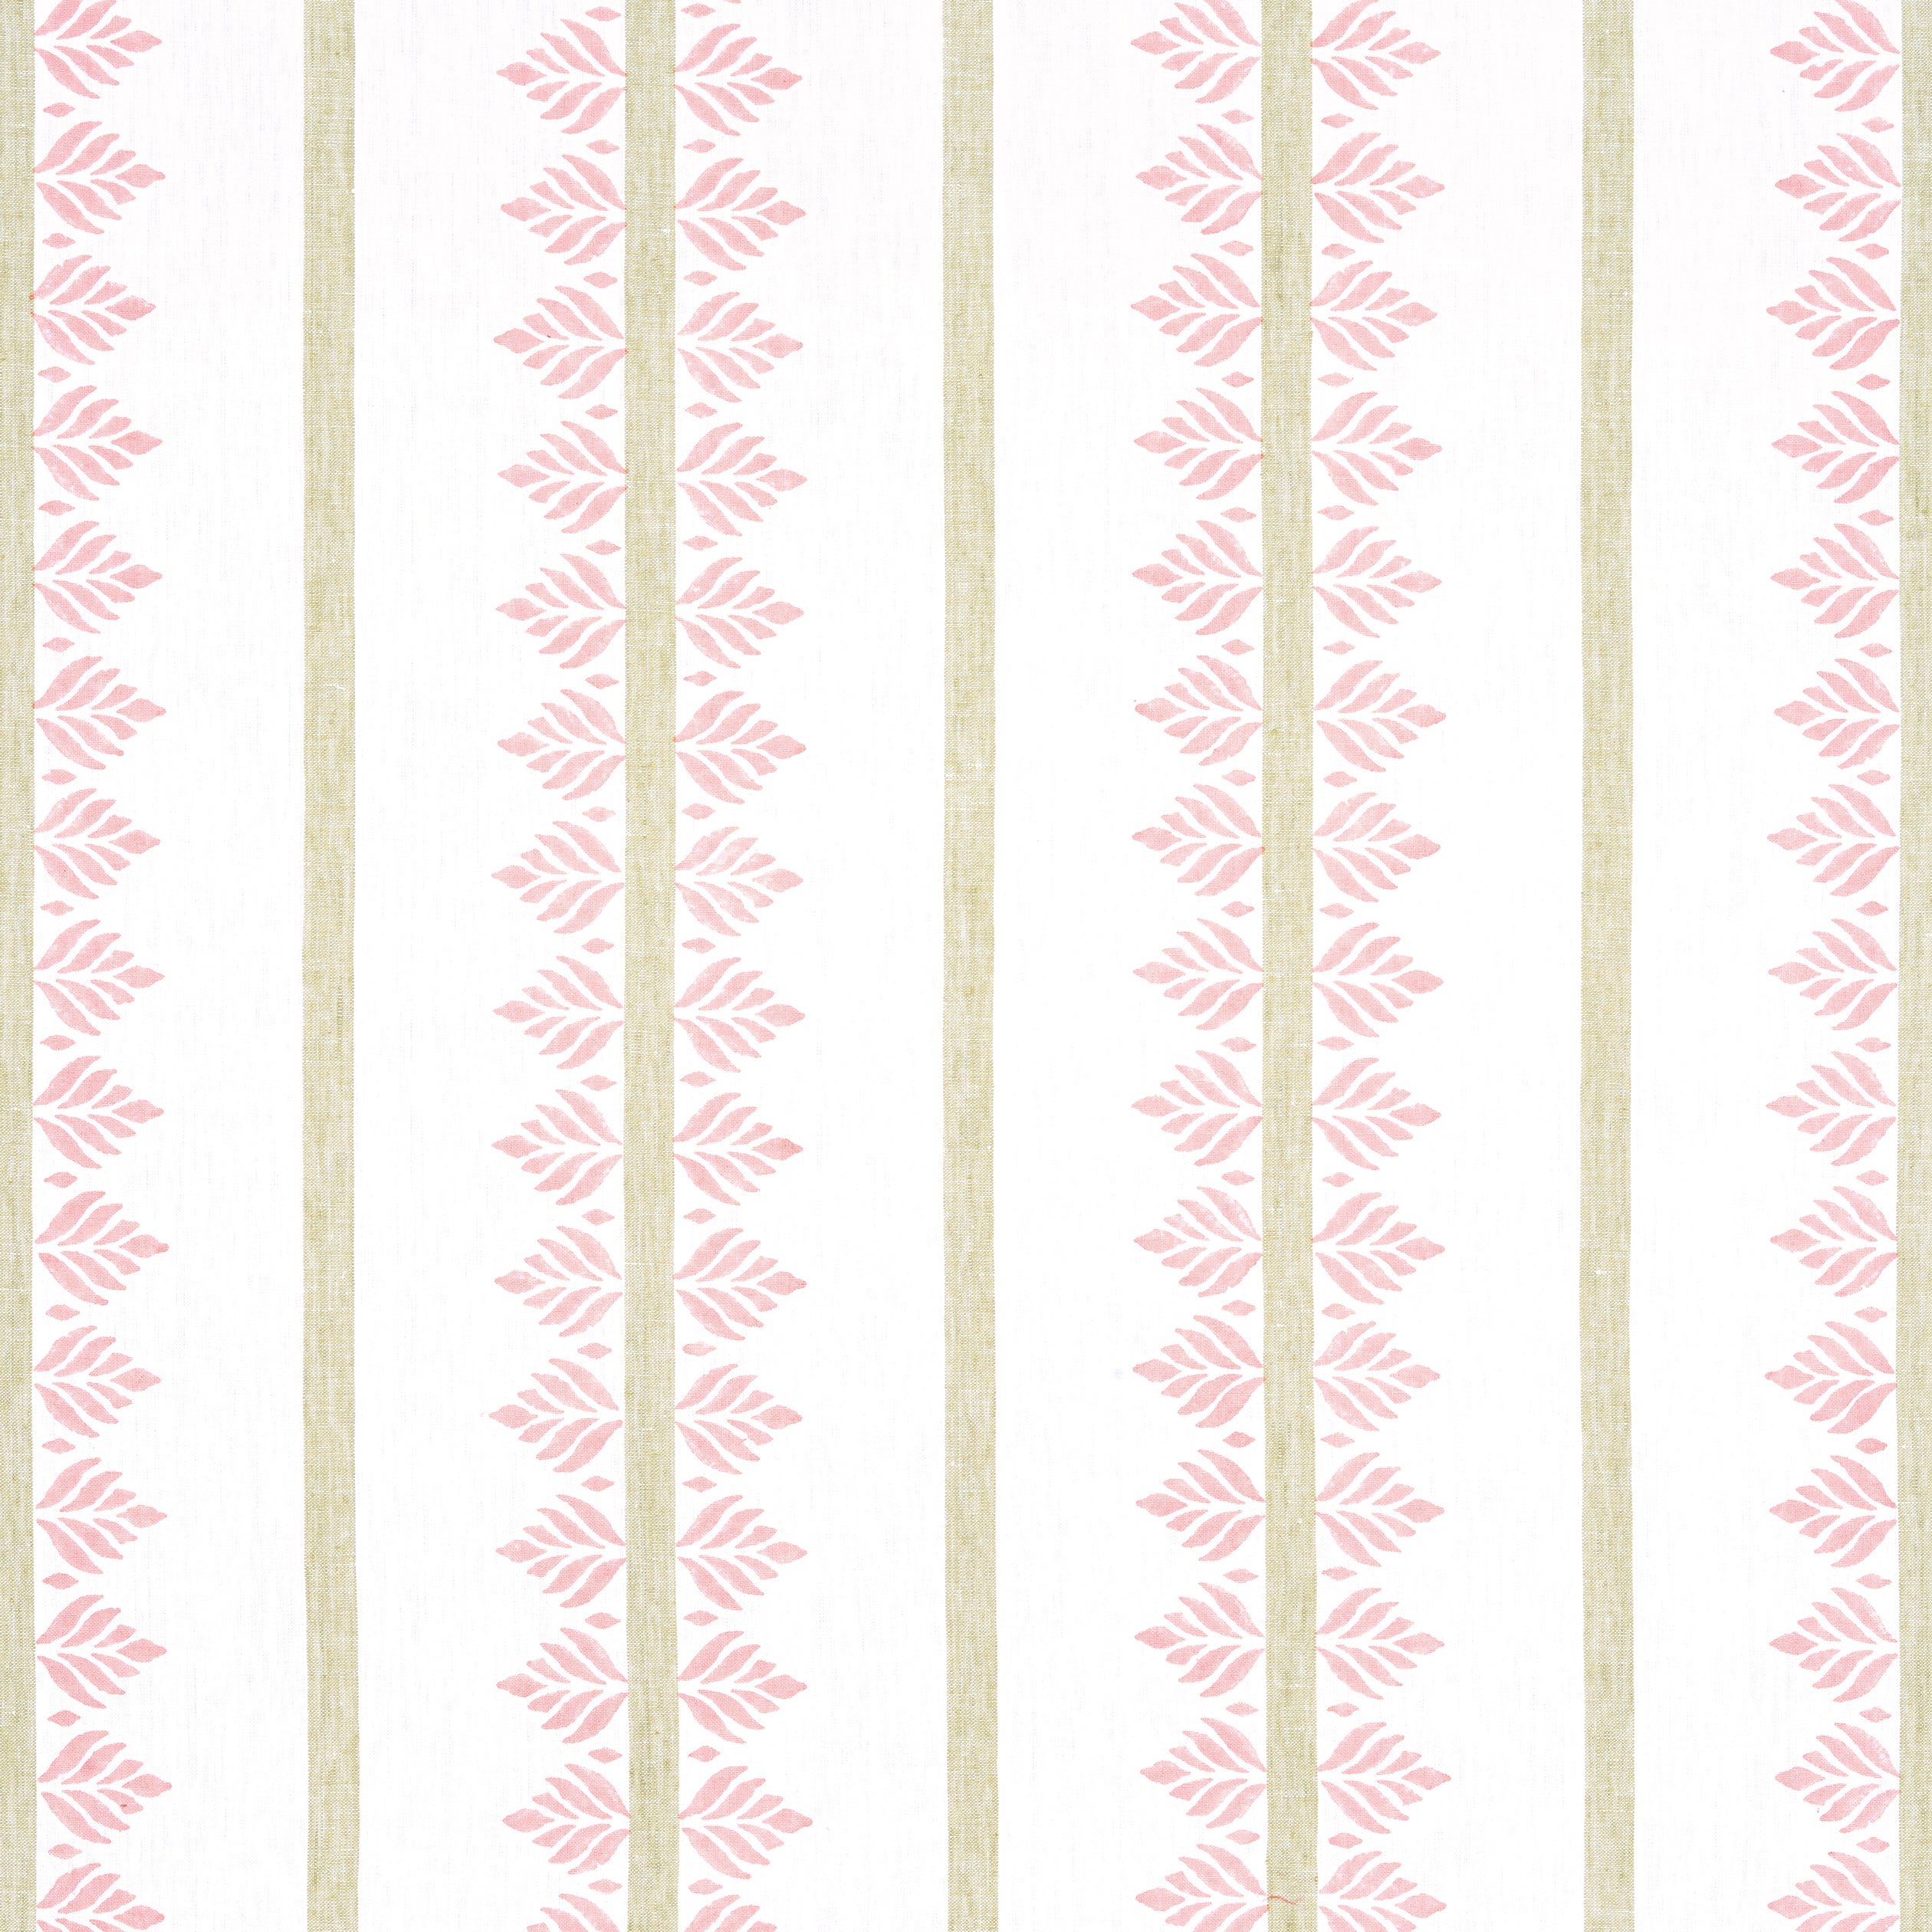 Fern Stripe fabric in Blush color - pattern number AF15100 - by Anna French in the Antilles collection